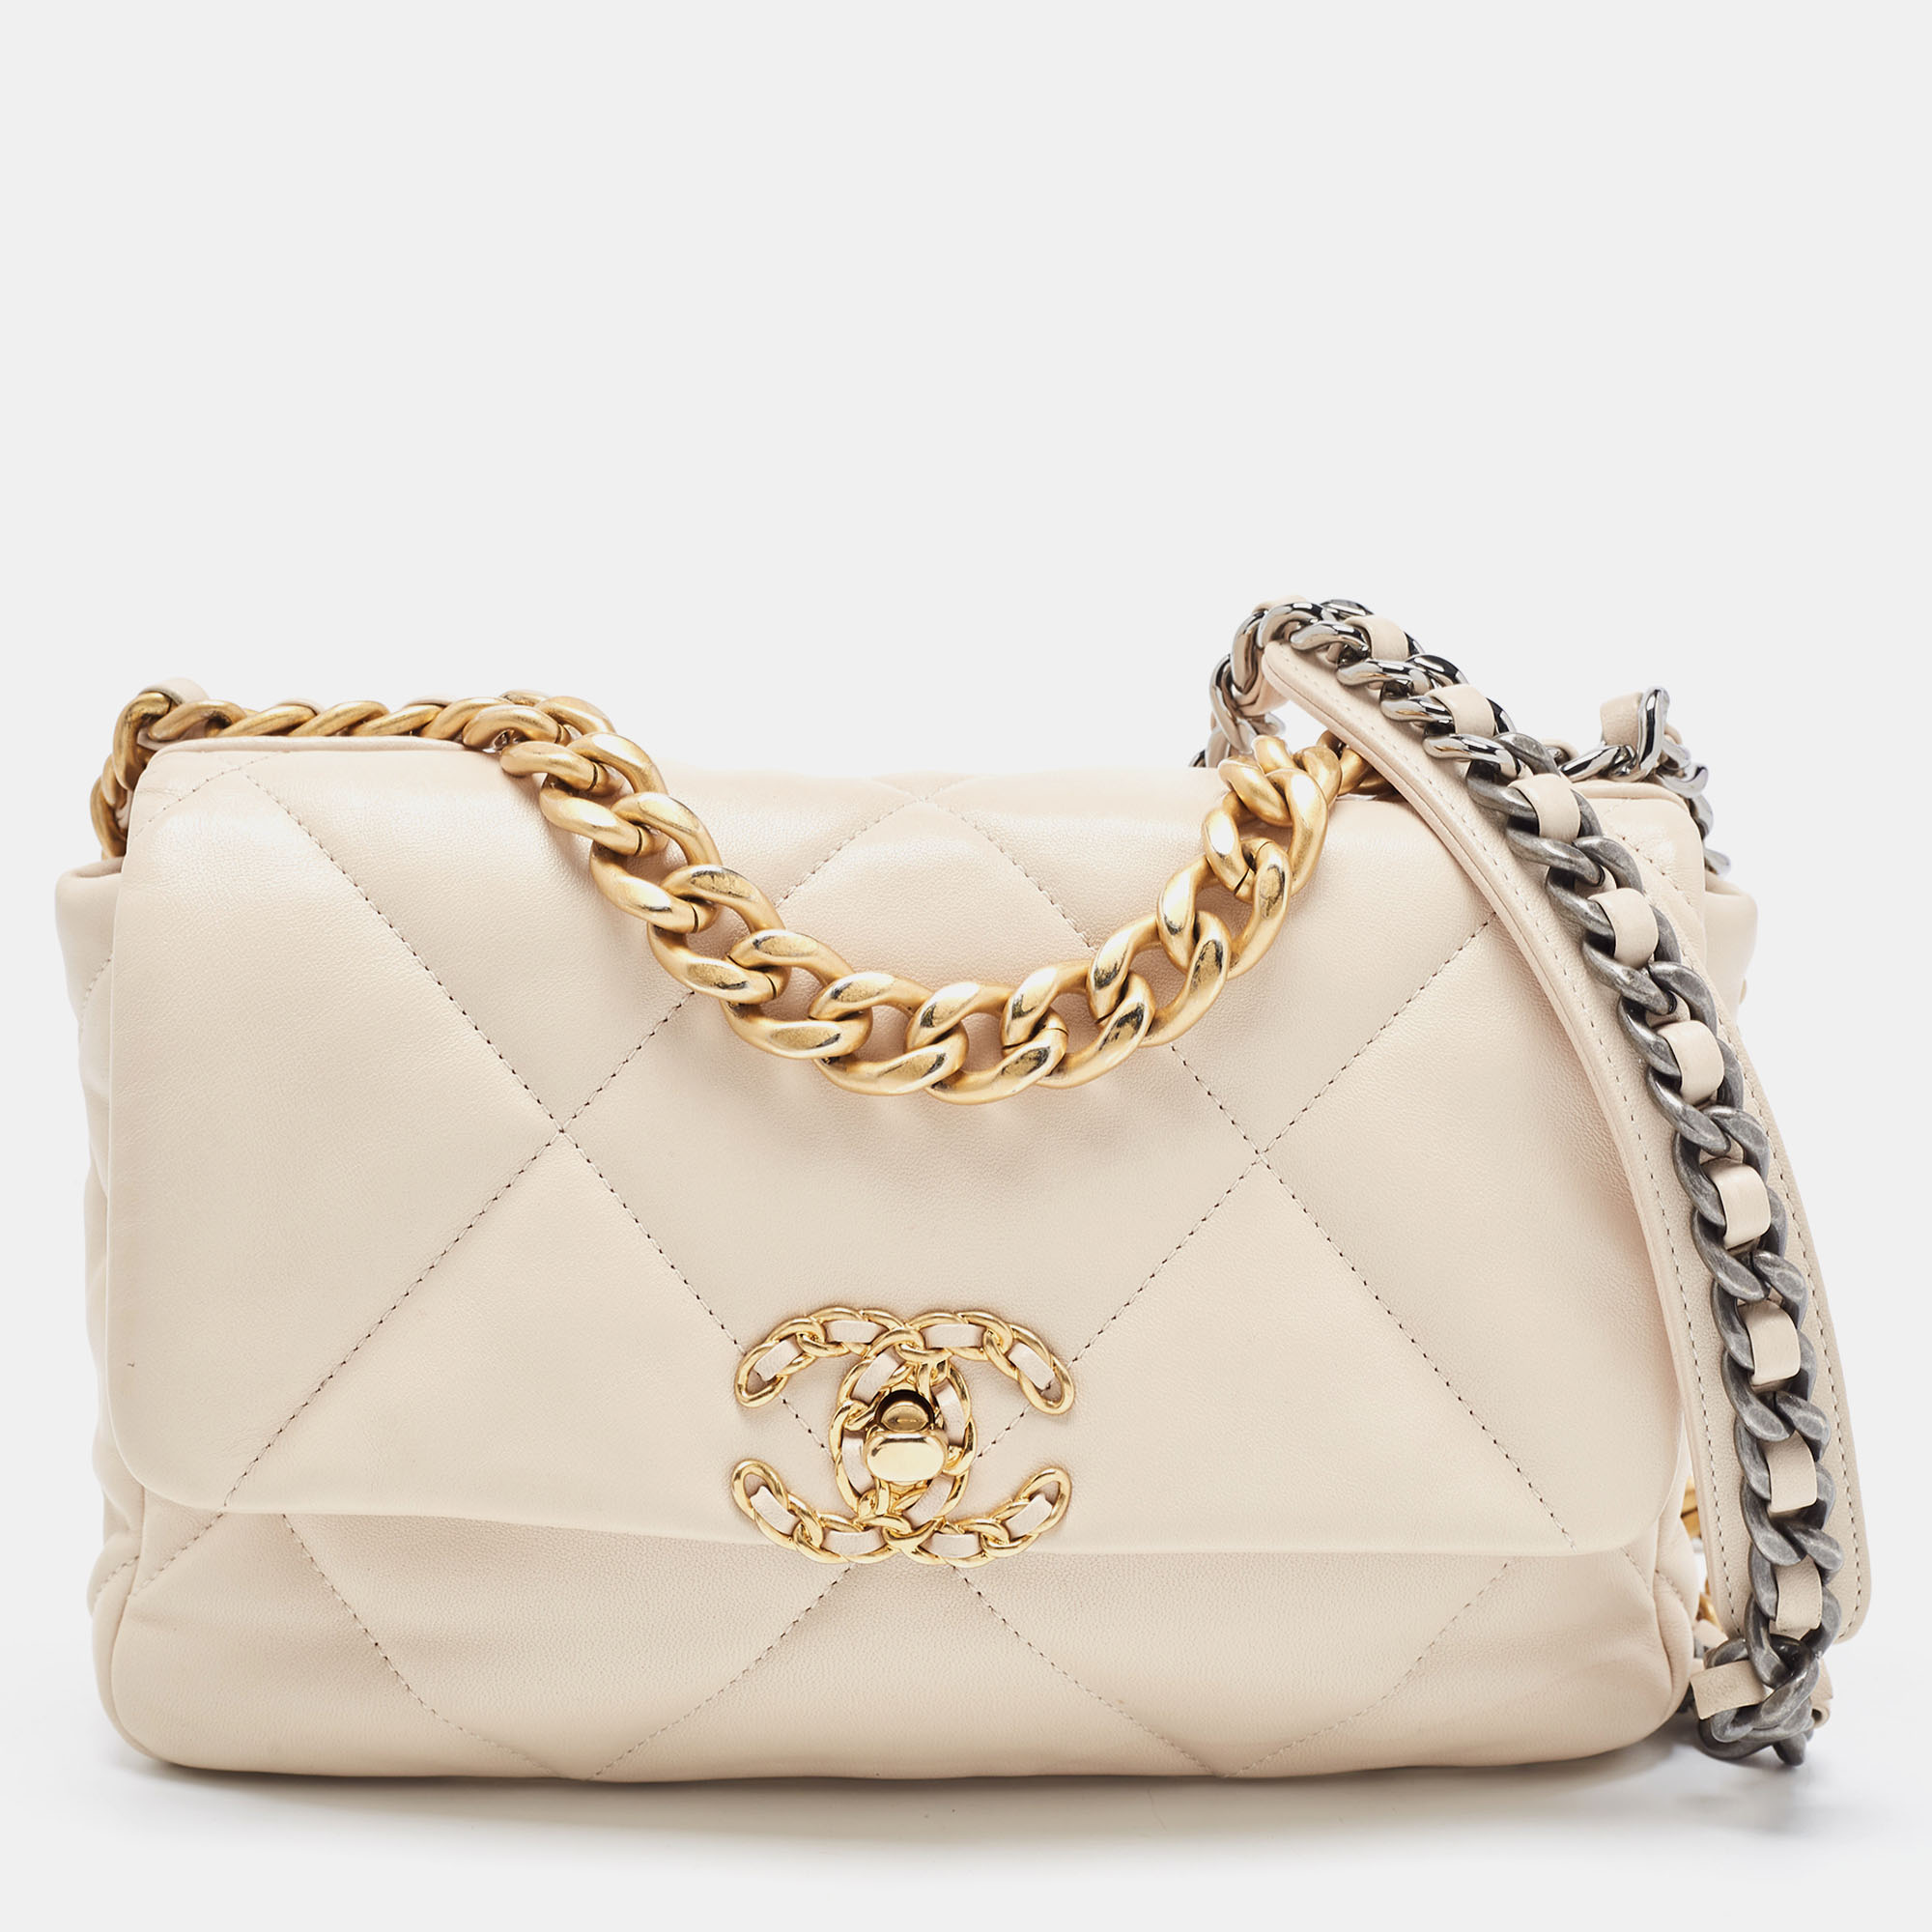 Chanel Beige Quilted Leather Medium 19 Flap Bag